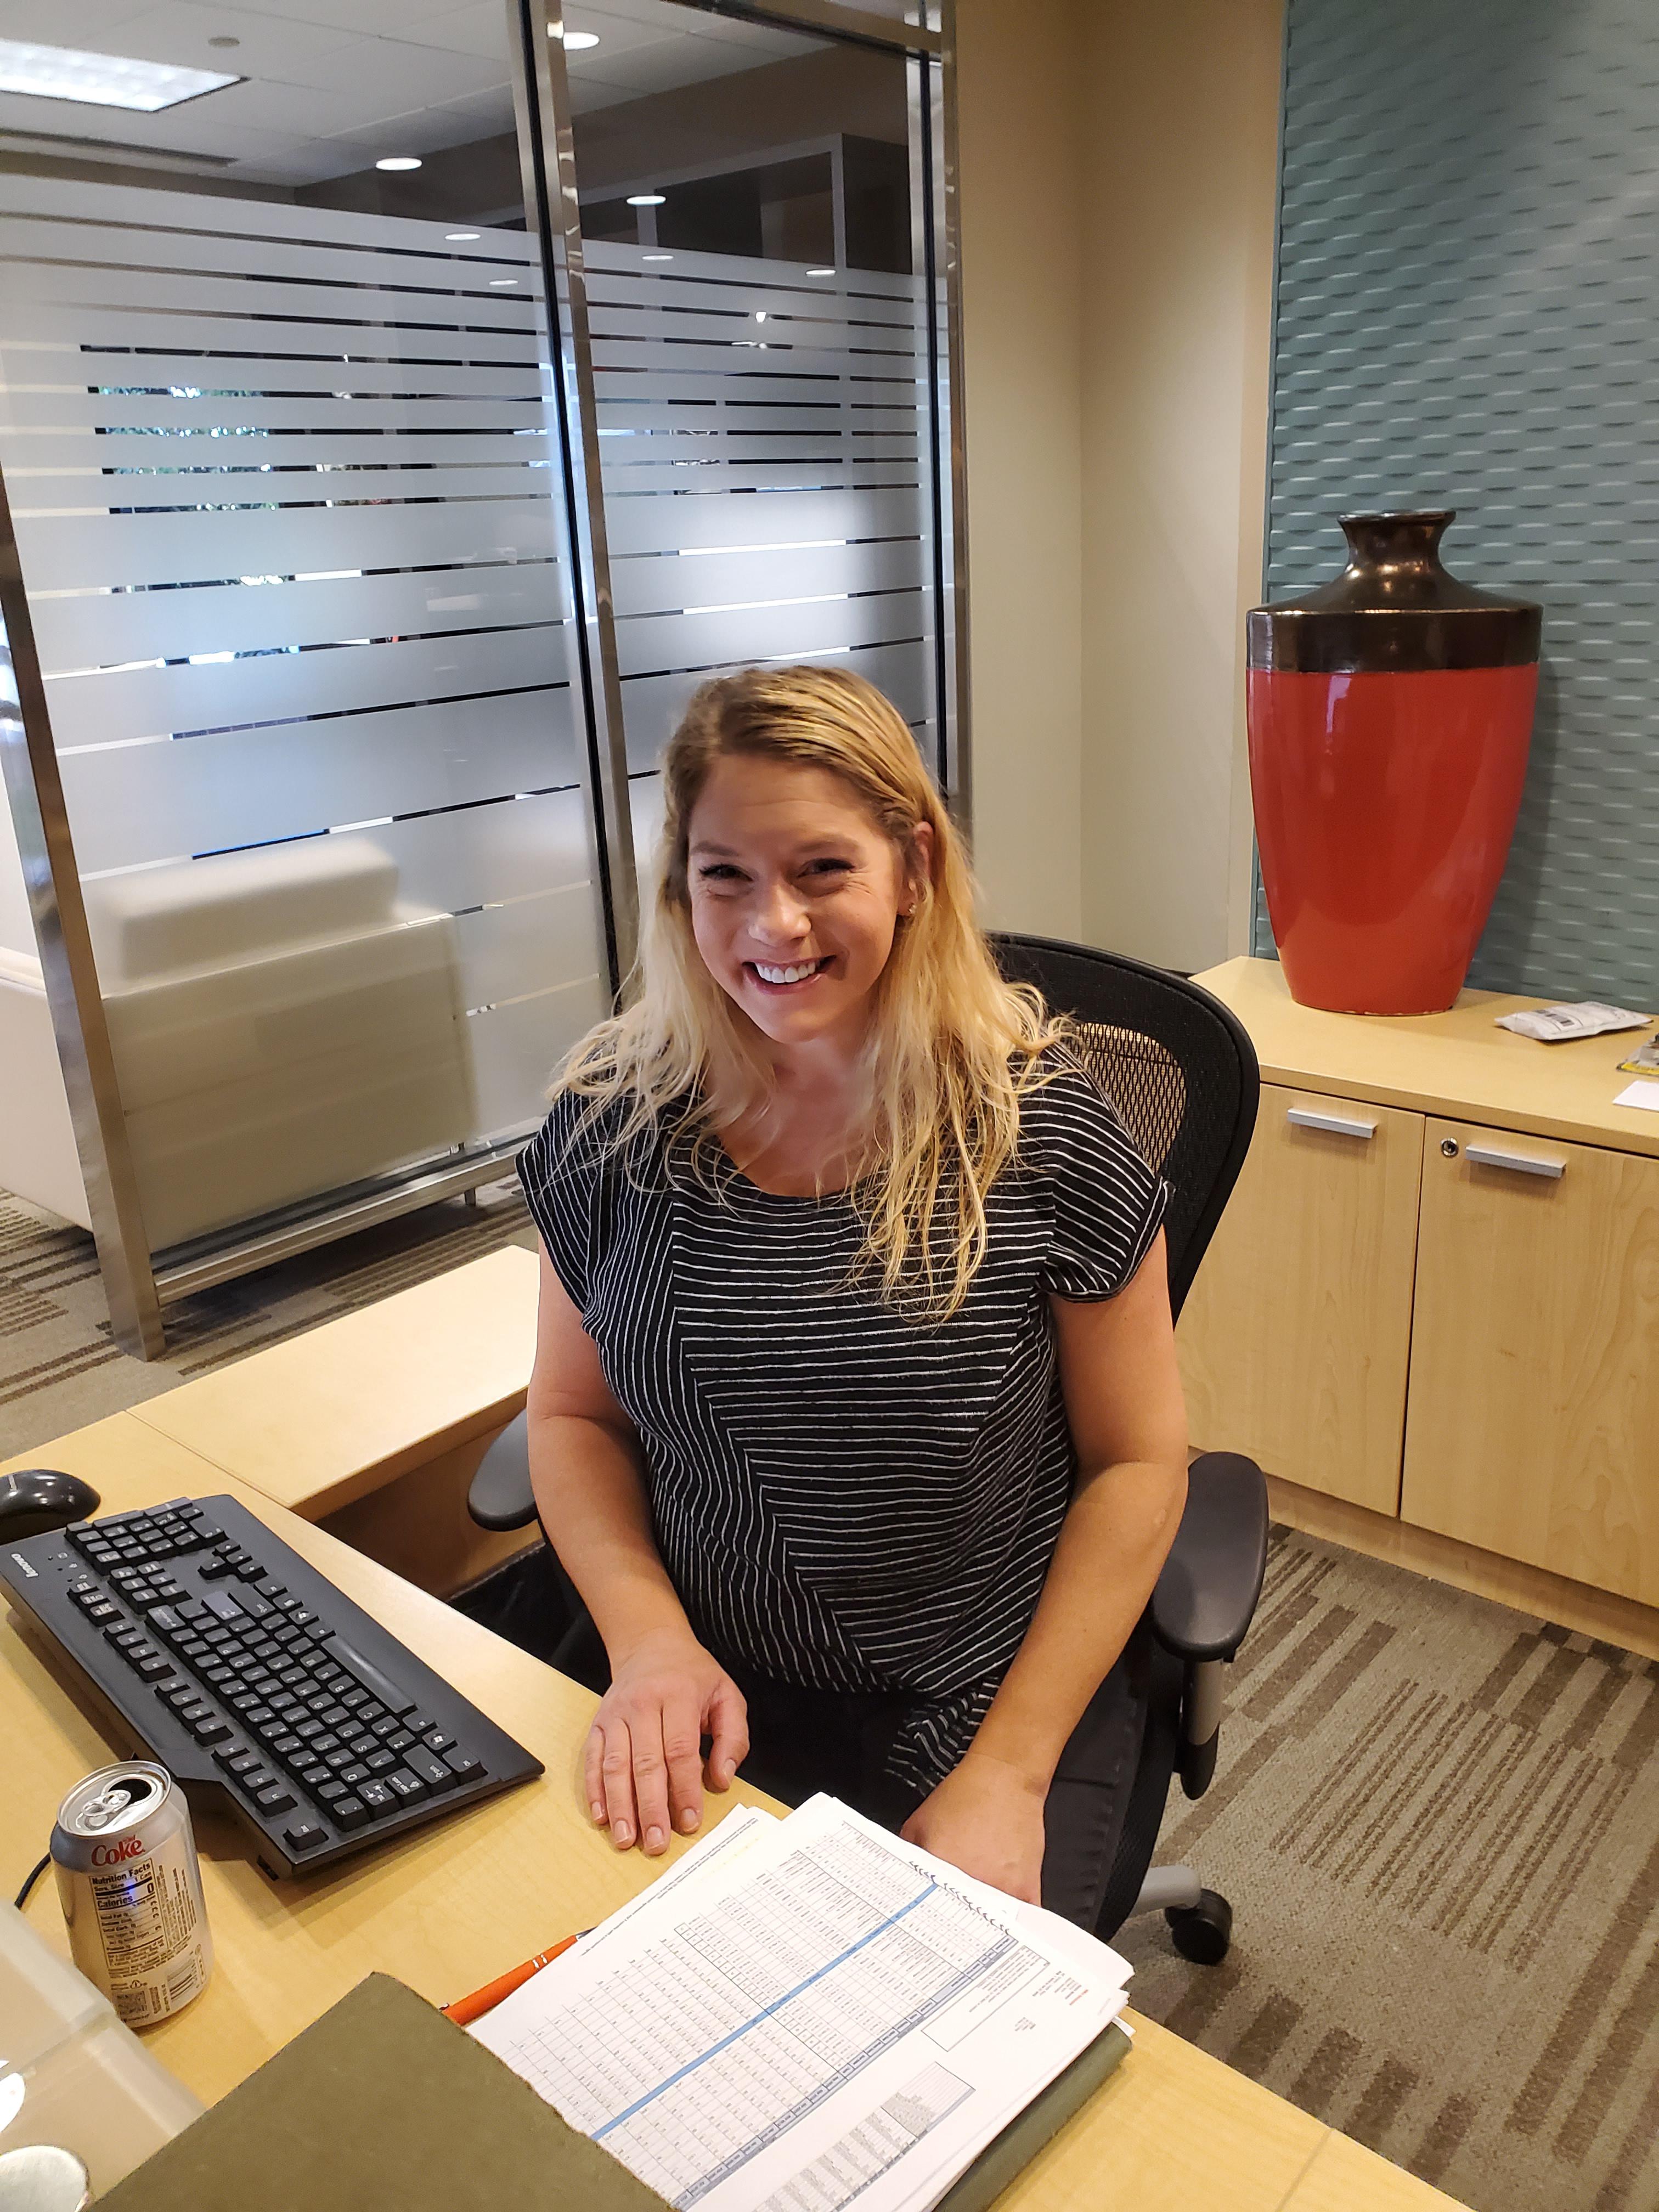 We have Andrea at the office of Websnoogie, LLC. She is so helpful and makes a difference with our team for web design, web hosting, and SEO assistance.